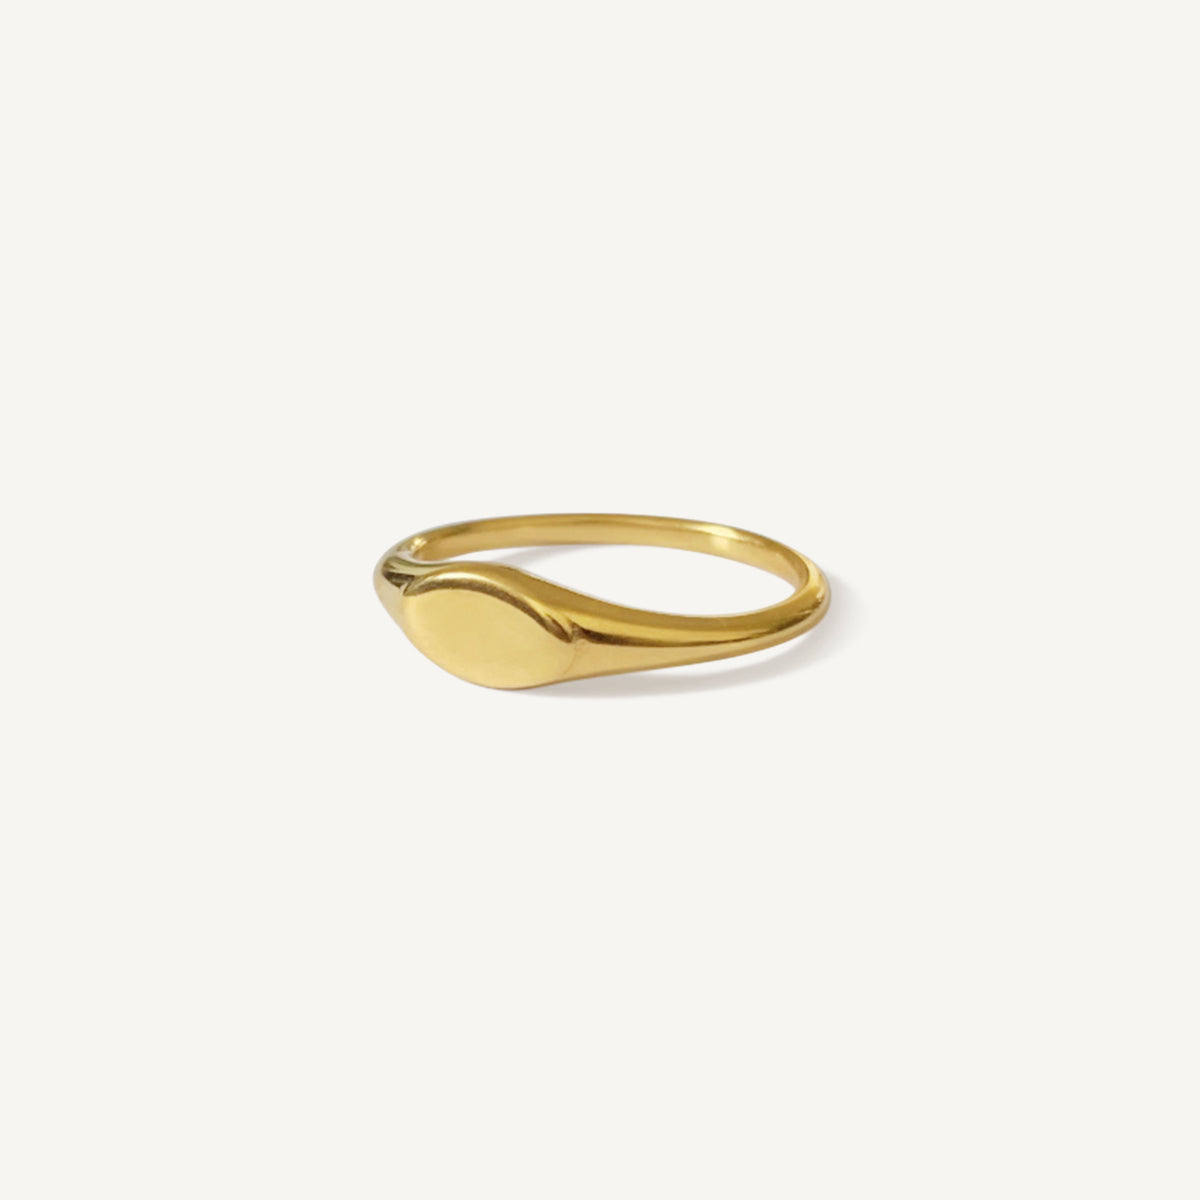 The Minimal Oval Signet Ring